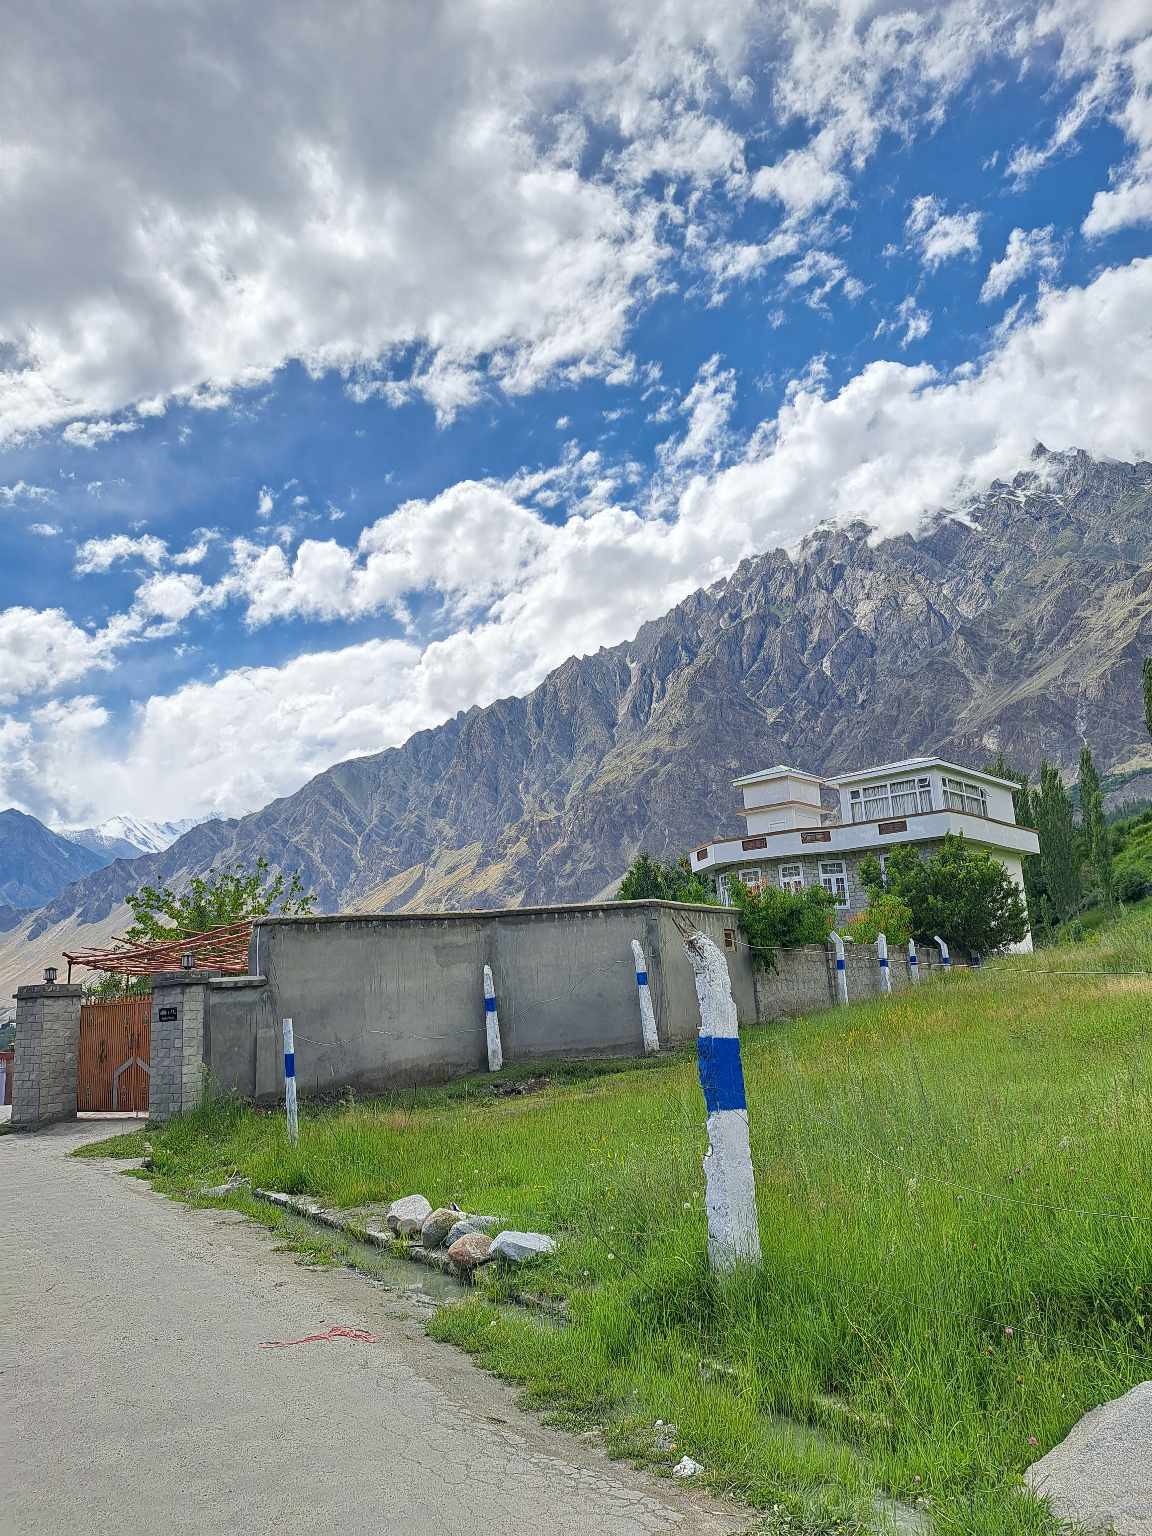 Amn e Yal- Private Residence in Karimabad Hunza